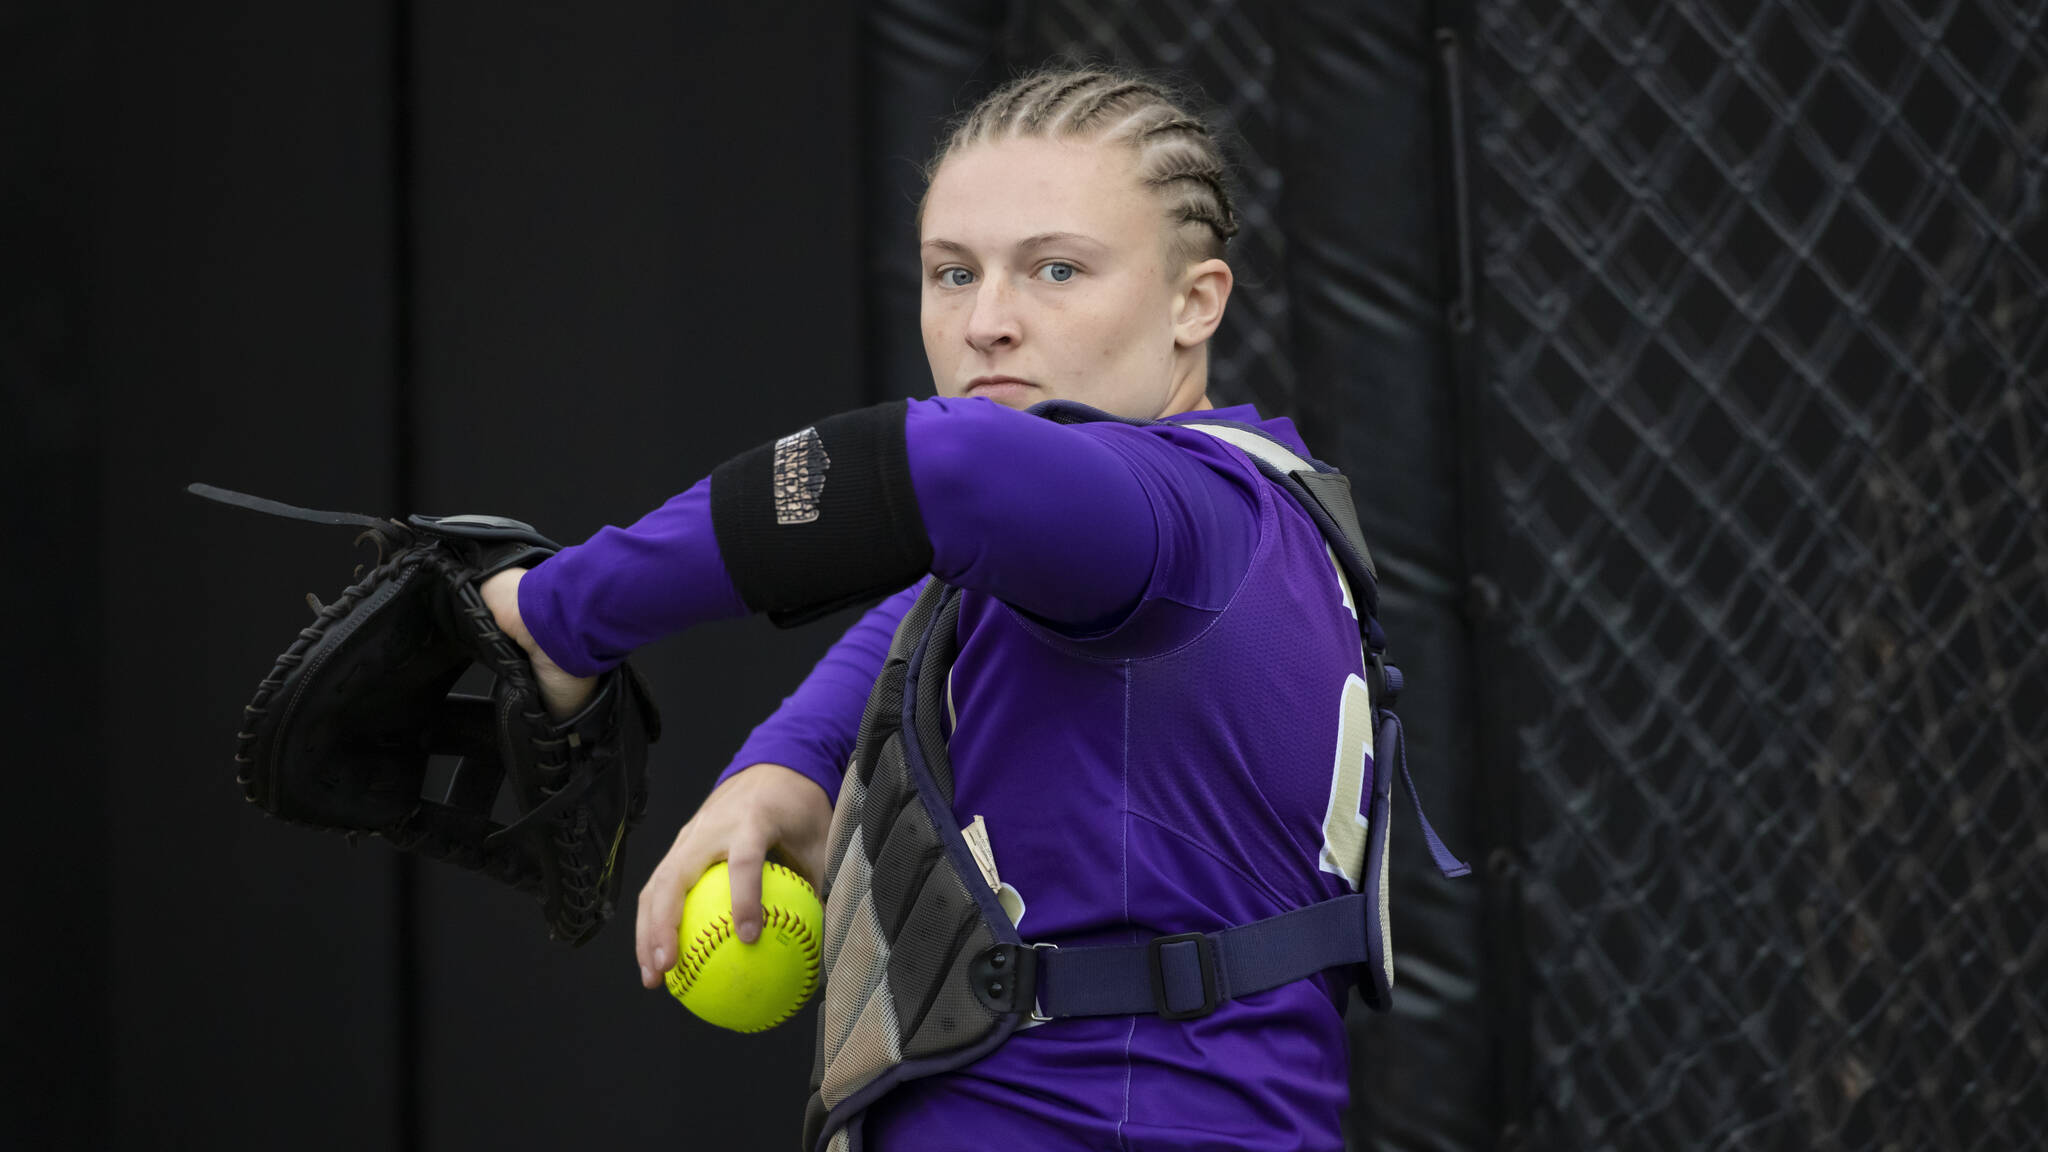 James Madison catcher Lauren Bernett throws during an NCAA college softball game on May 28, 2021, in Columbia, Mo. Five college athletes, including Meyer, took their own lives in the spring, sparking concerns that schools were not doing enough for some of their higher-profile students. (AP Photo / Colin E. Braley)